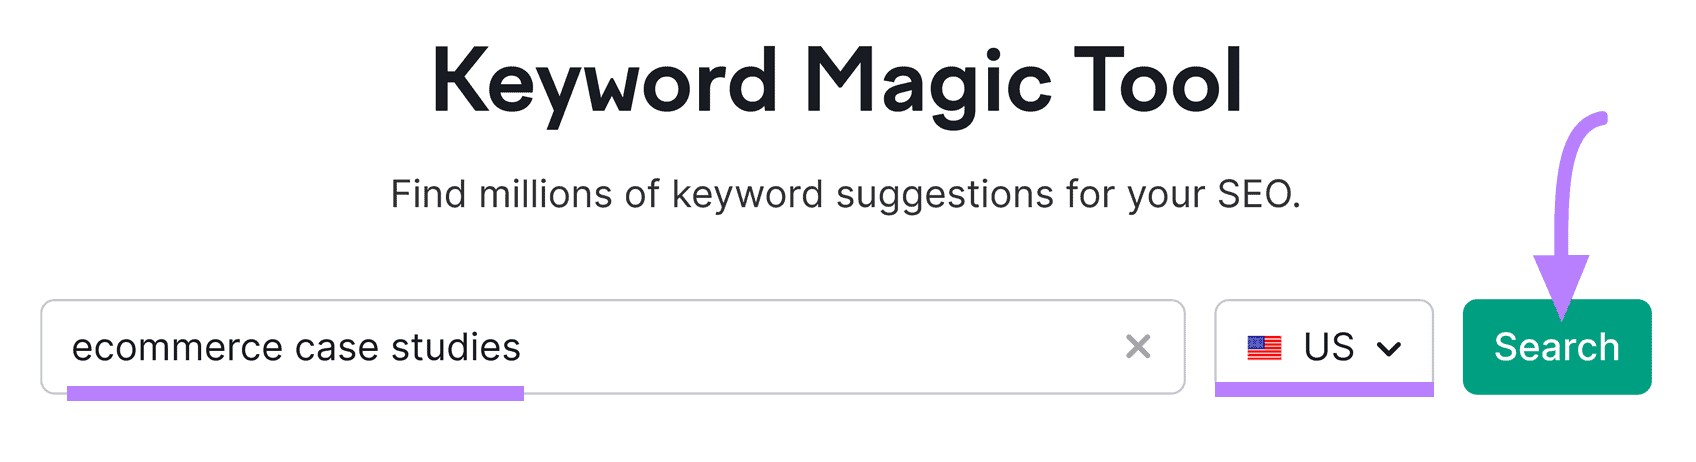 "ecommerce case studies" entered into Keyword Magic Tool search bar